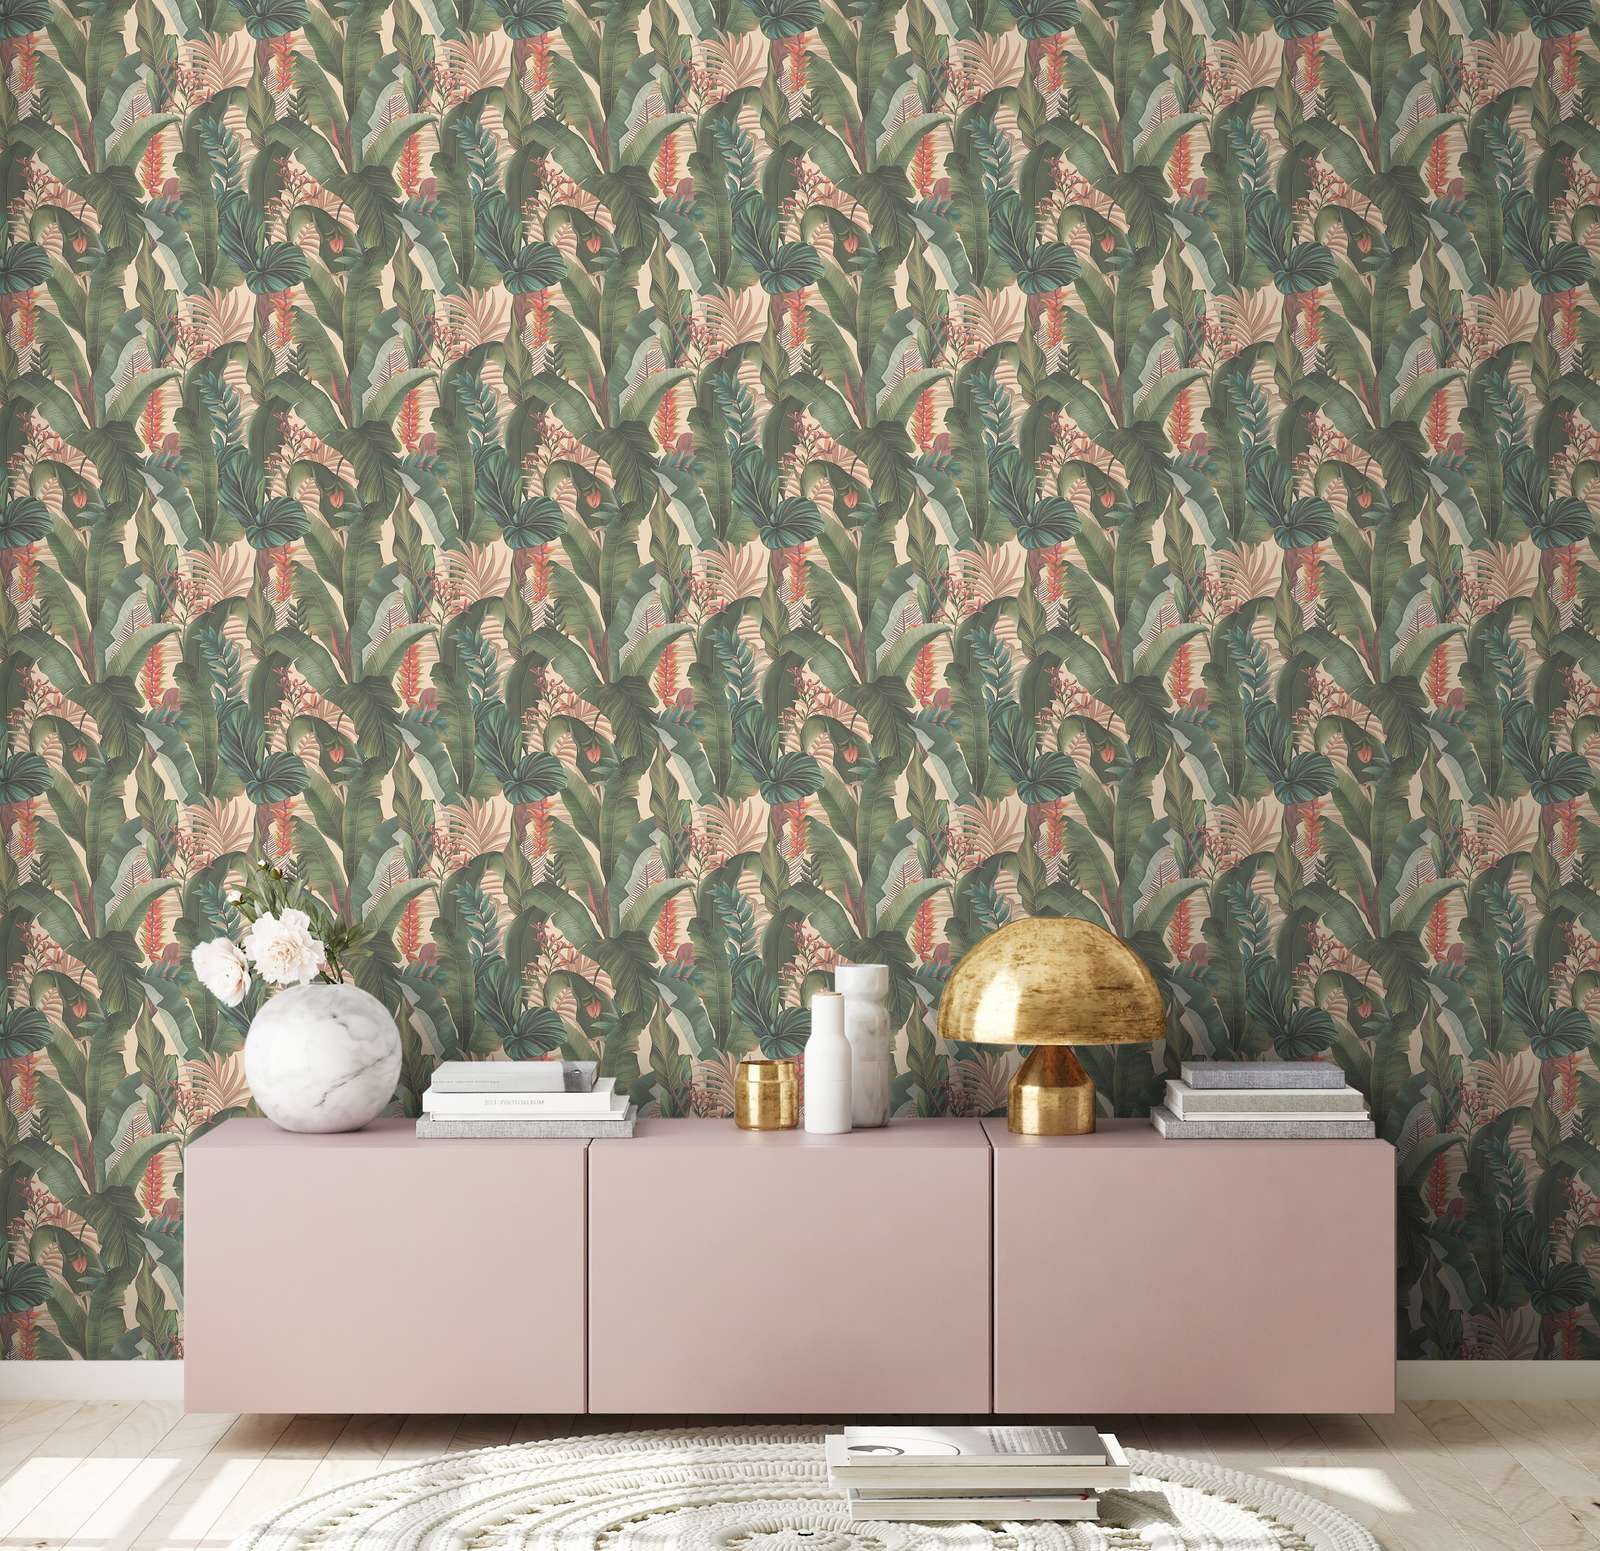             Jungle wallpaper with palm leaves & flowers in floral style textured matt - Beige, Green, Pink
        